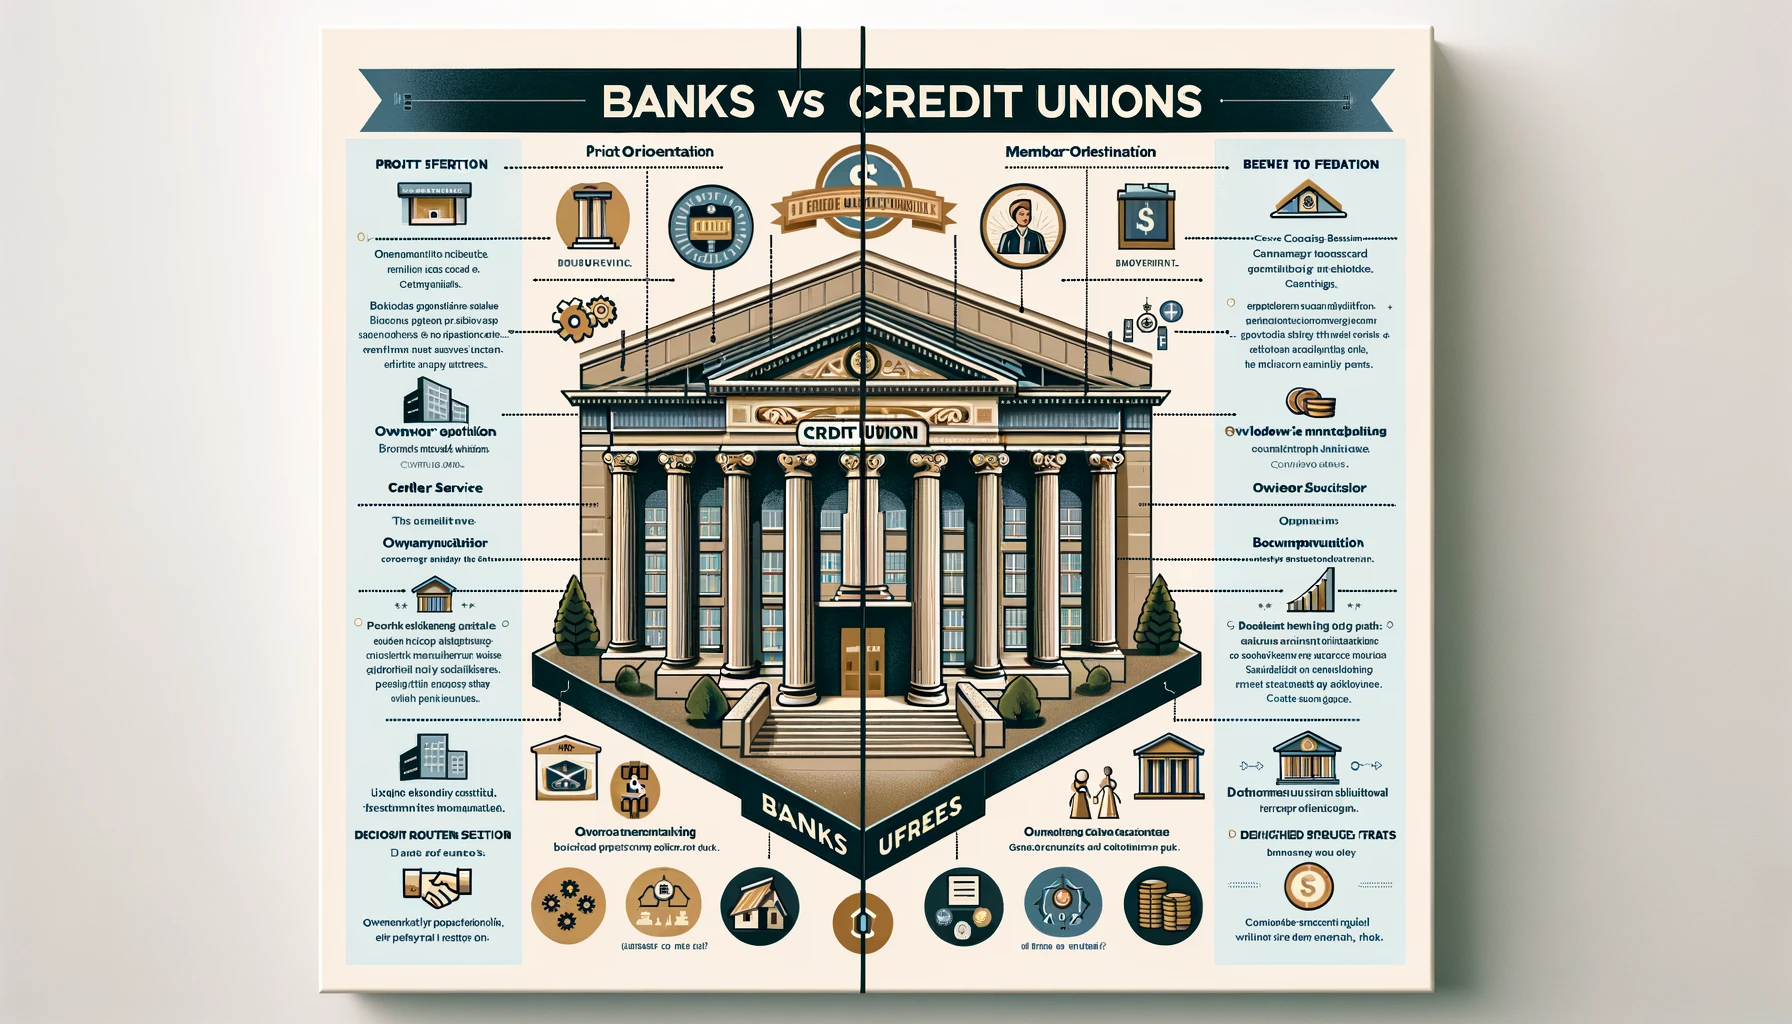 What’s the key differences between Banks and Credit Unions?